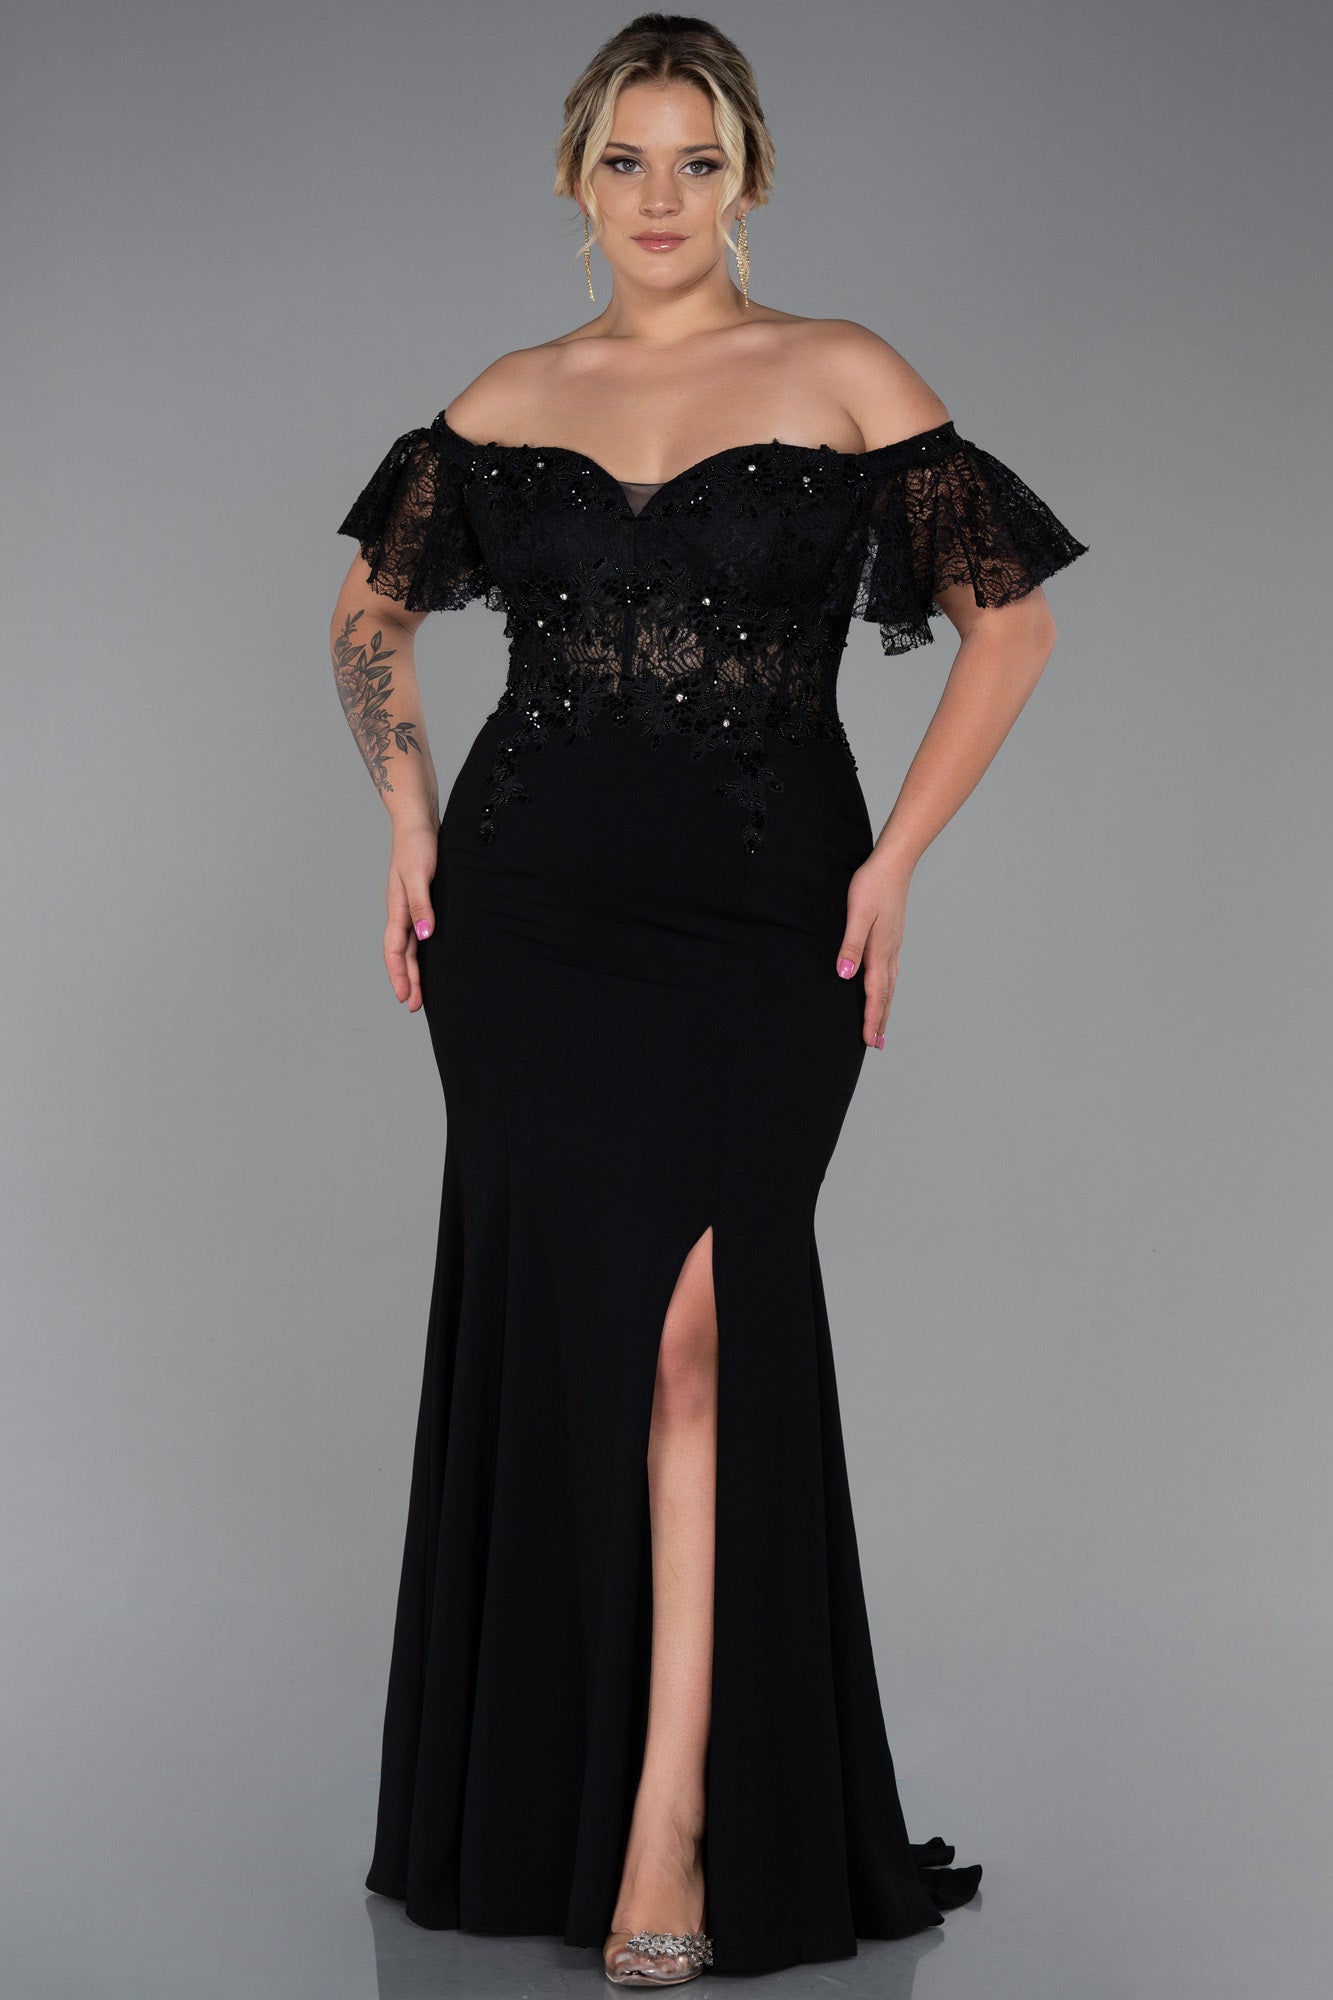 Manuela Black Plus Size Gown Lace Crepe Fabric with Floral embroidery ...